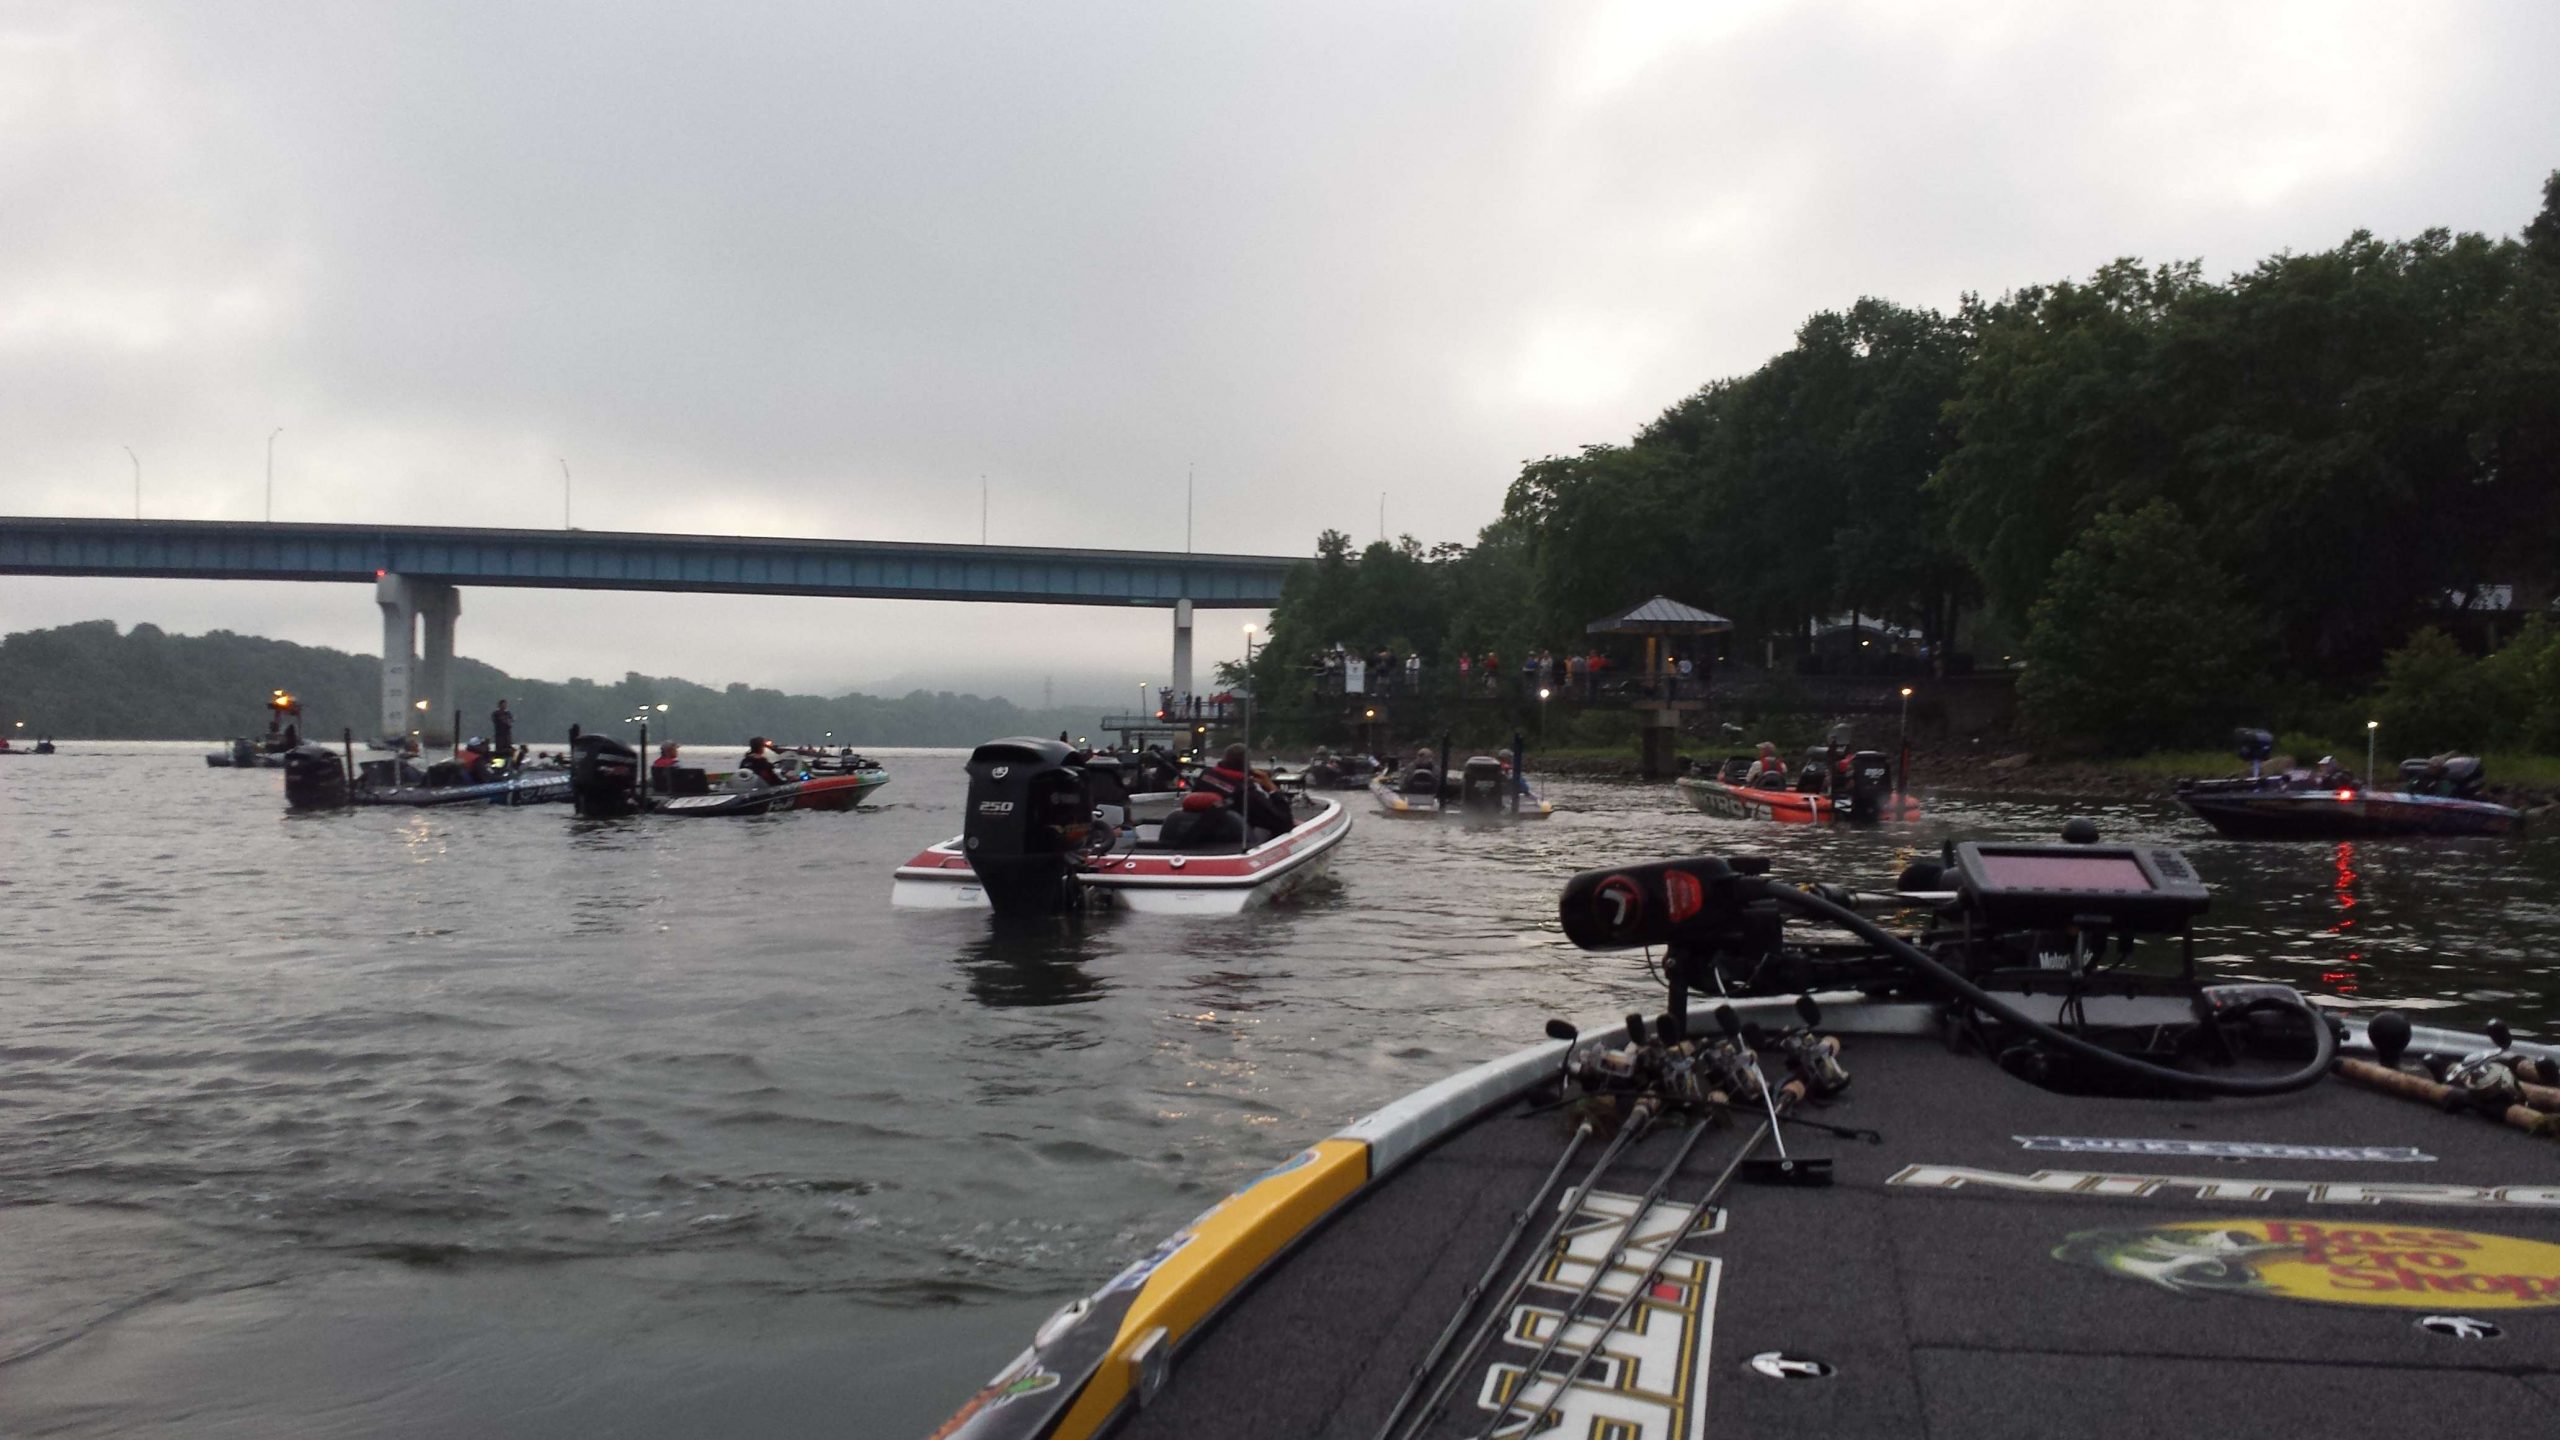 On Day 3 of BASSfest, Ninety anglers took off on Nickajack Lake for one last chance to qualify for the second half of BASSfest competition on Chickamauga Lake. 
<br>Photo by Bassmaster Marshal Jason McCanless